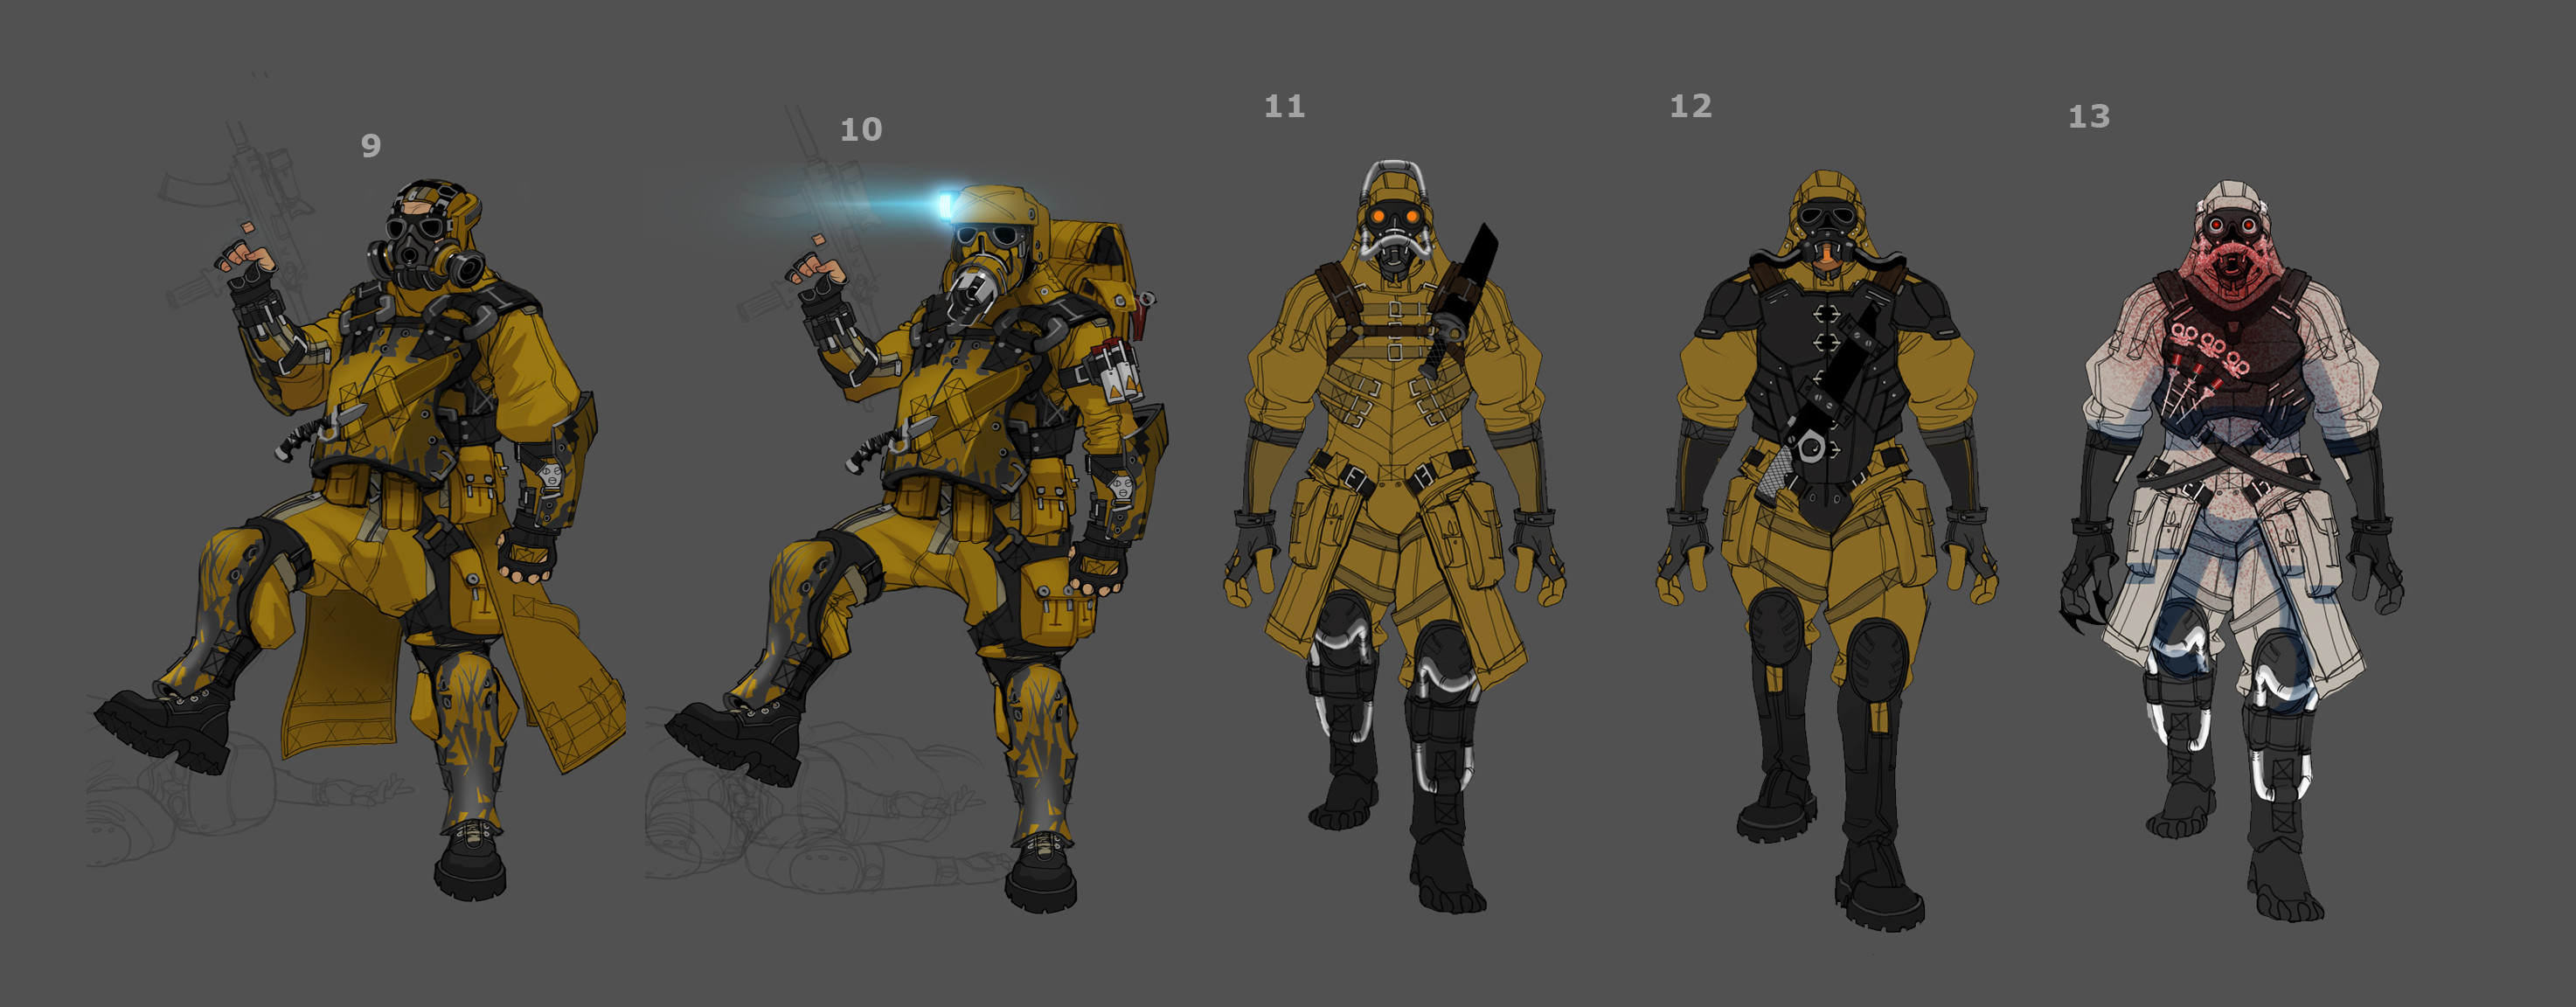 Variations on the ISA soldier